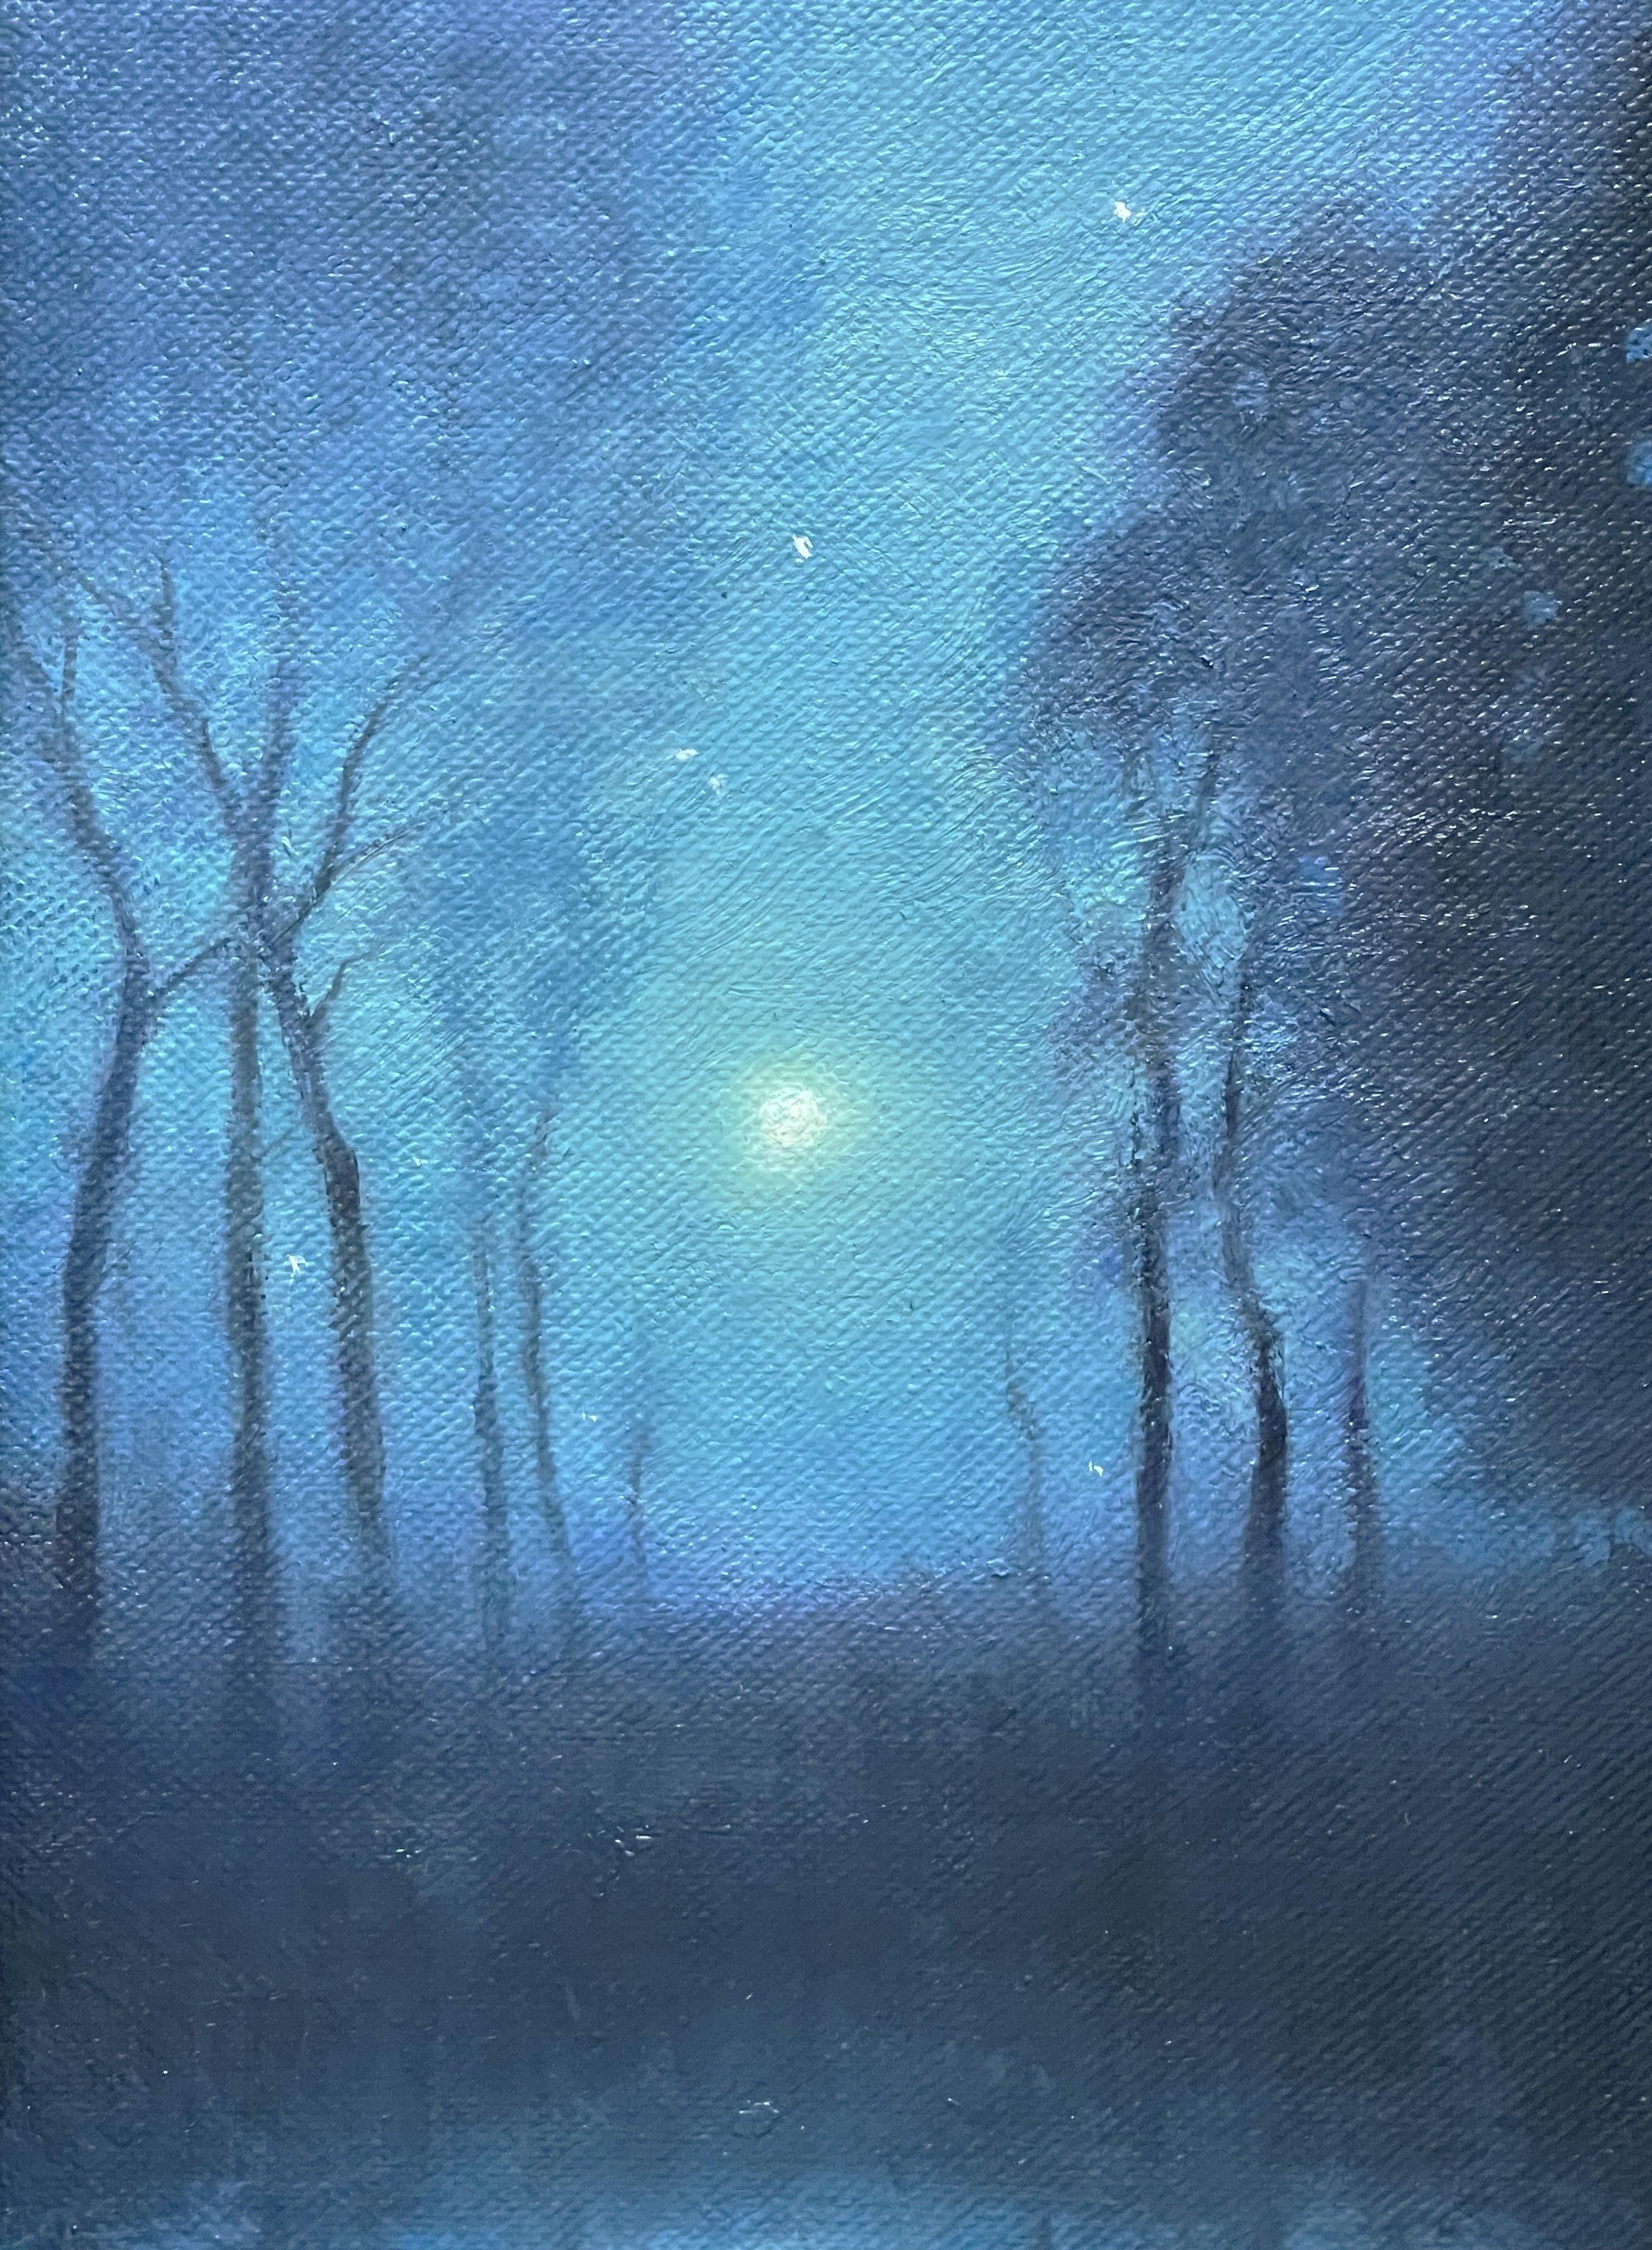  Impressionistic Moonlight Landscape Oil Painting Michael Budden  For Sale 2